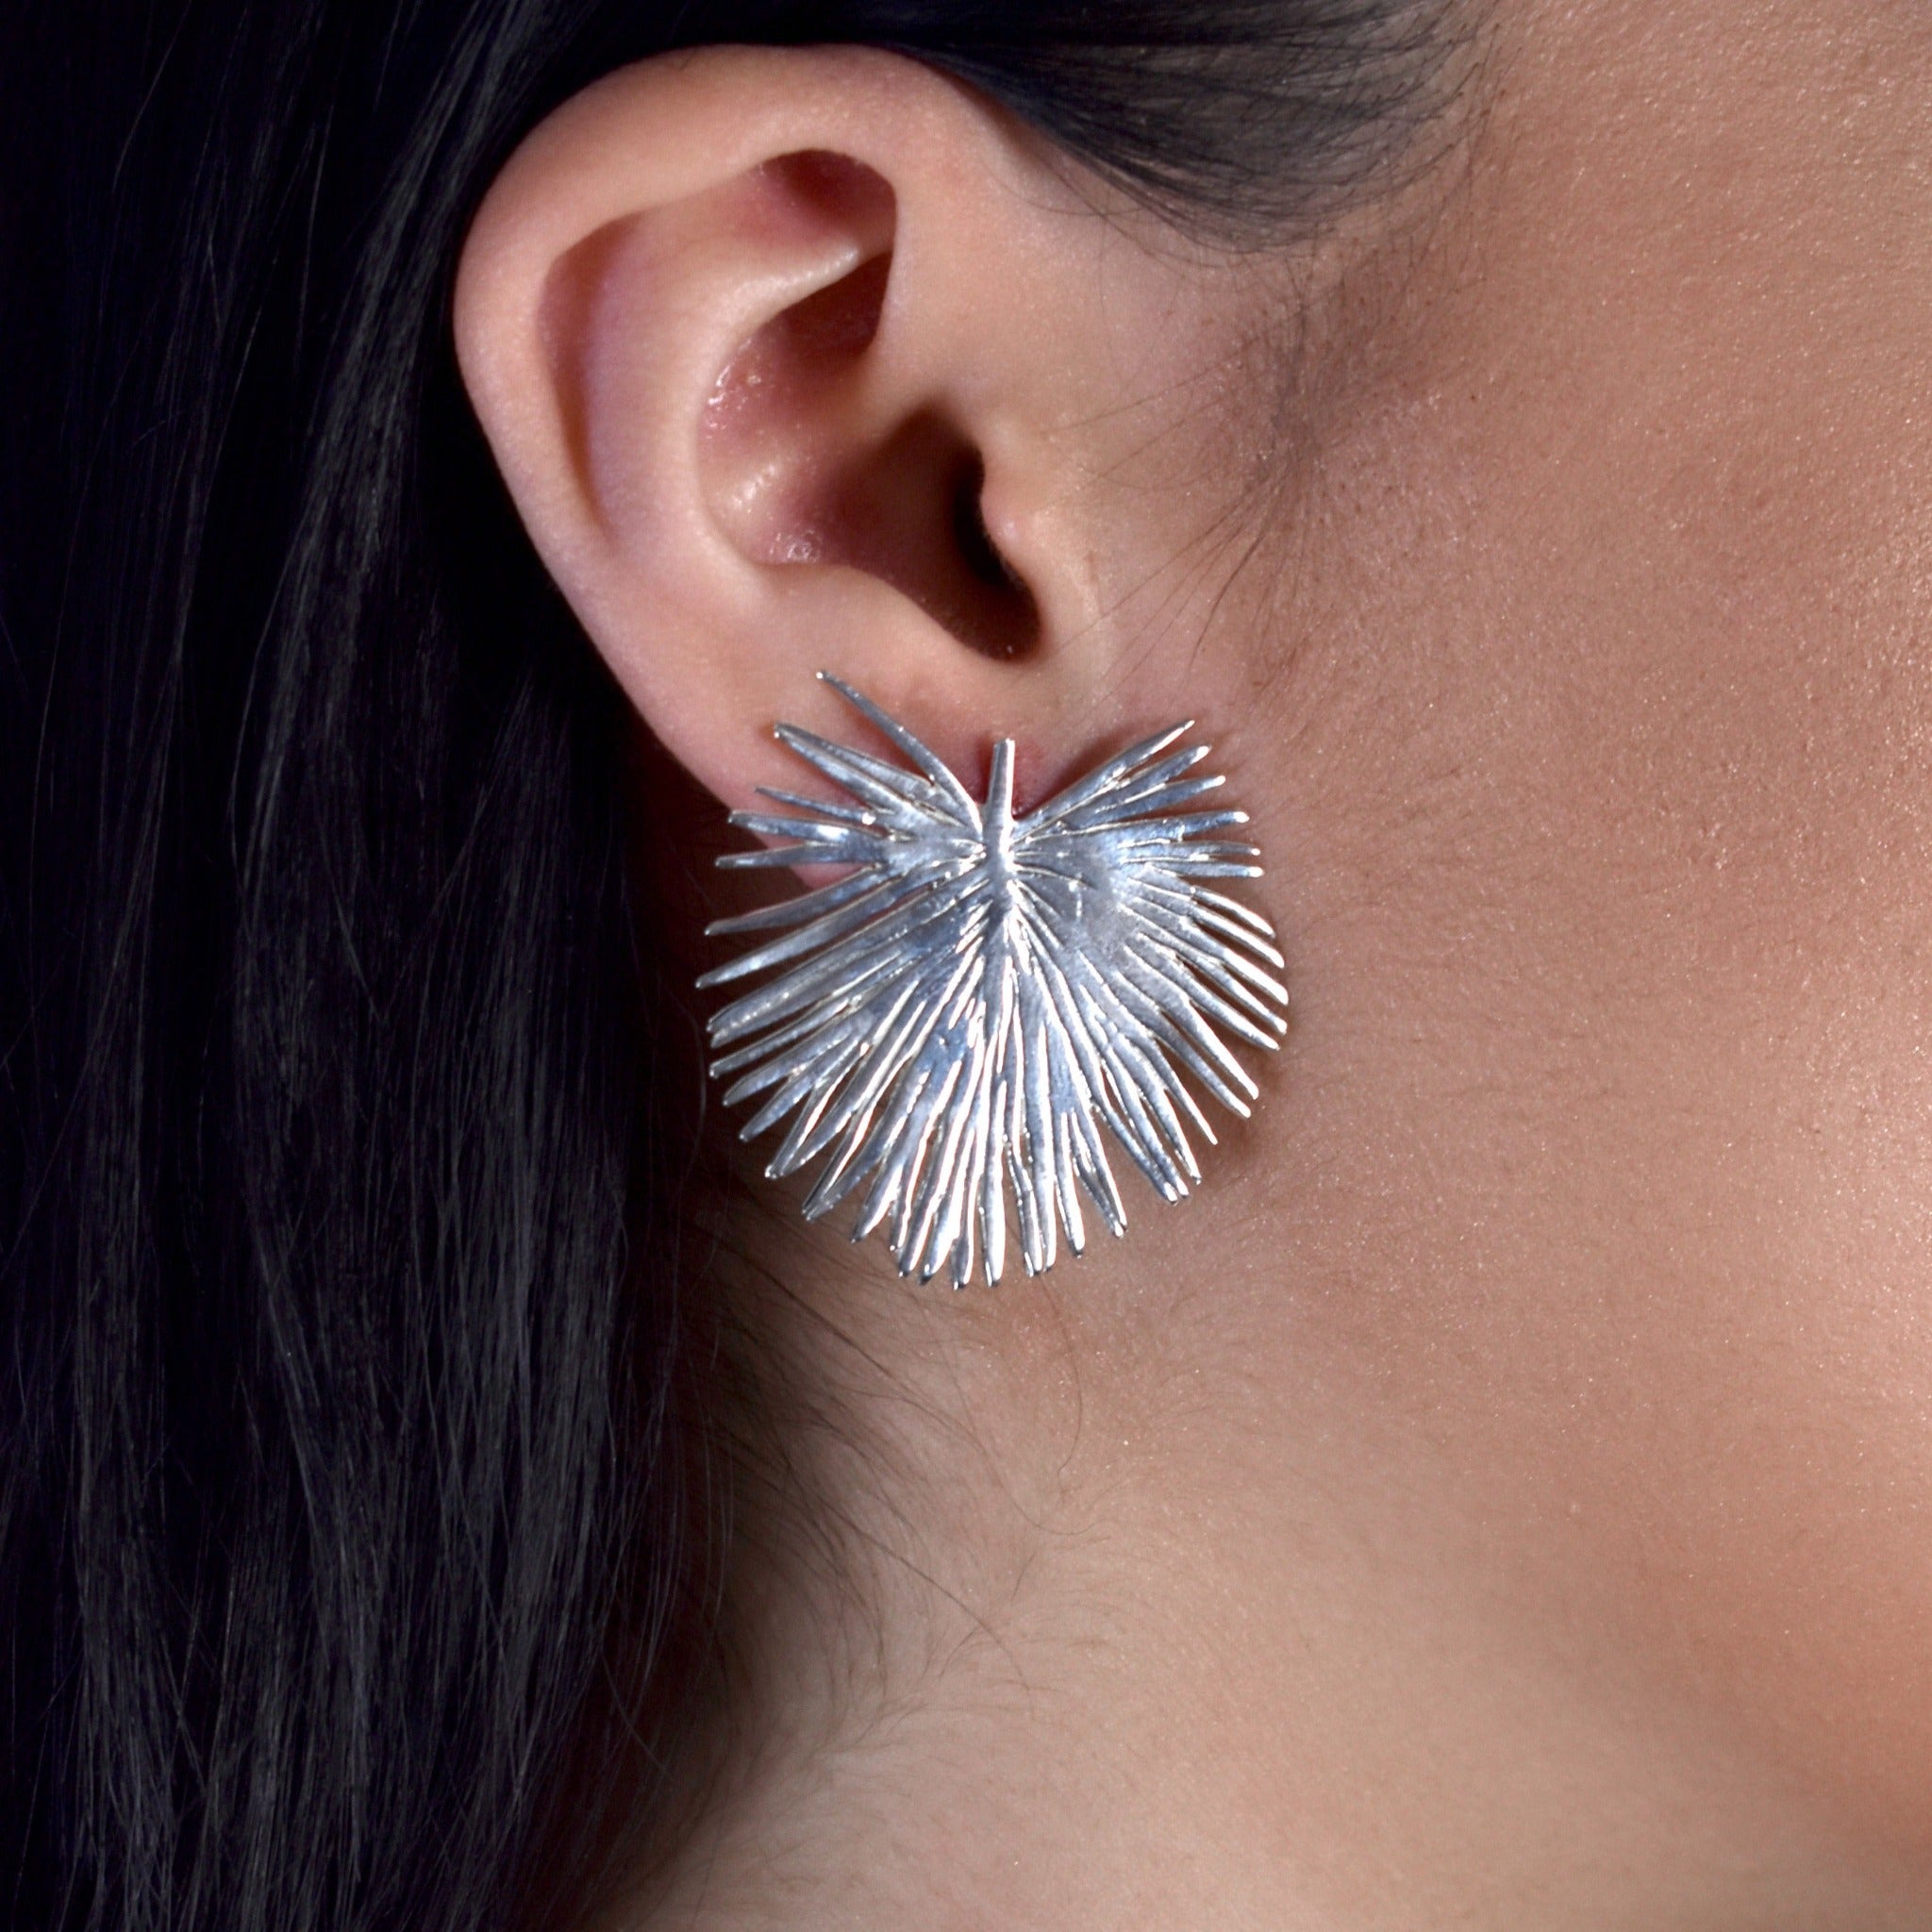 Solid sterling silver stud earrings made by hand shaped like a palm leaf on model